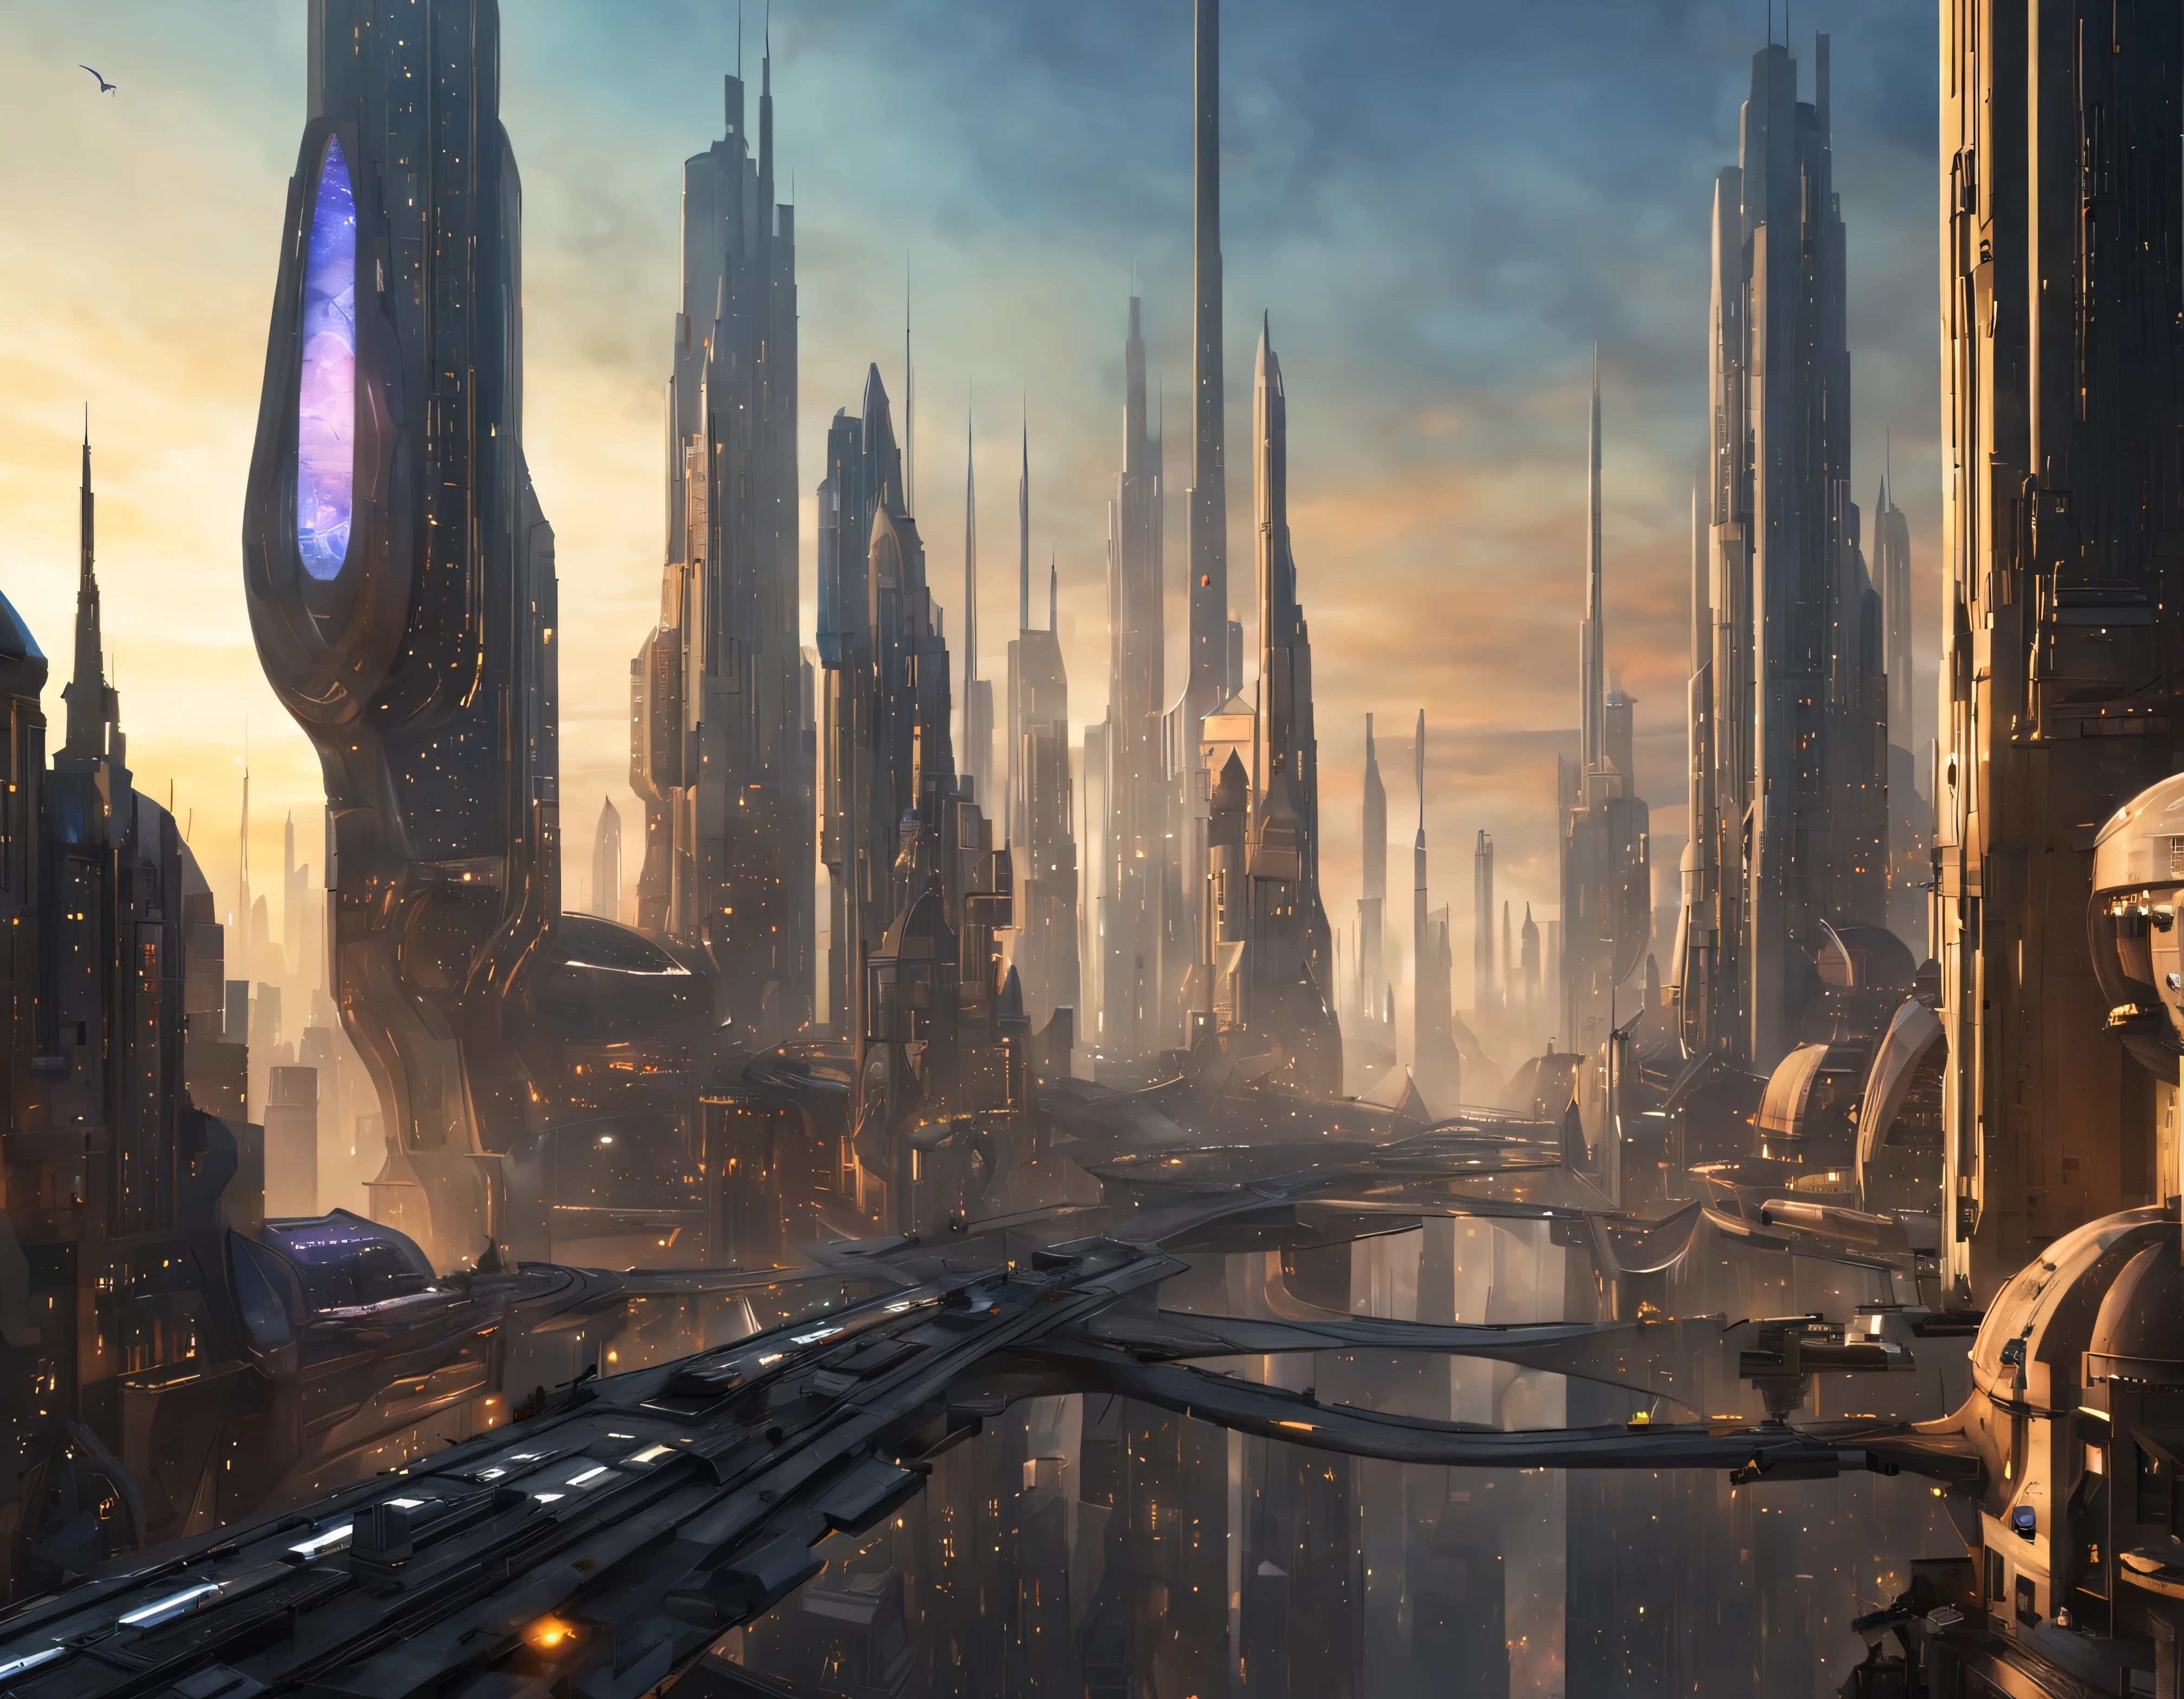 (The city of Coruscant from Star Wars as designed by Doug Chiang), futuristic fantasy city with immense buildings of technological design (that form an infinite avenue), non-blurred compactor buildings with metallic appearance, lights in windows in buildings, daytime lighting with sun, with spectacular glass structures, (with bright colors). sunny pavement (dull). people walking. well defined image with many buildings together. sharp well defined 8k image. the buildings reach high into the background.,8k. cinematographic image. ((top quality masterpiece)). (3d rendering).